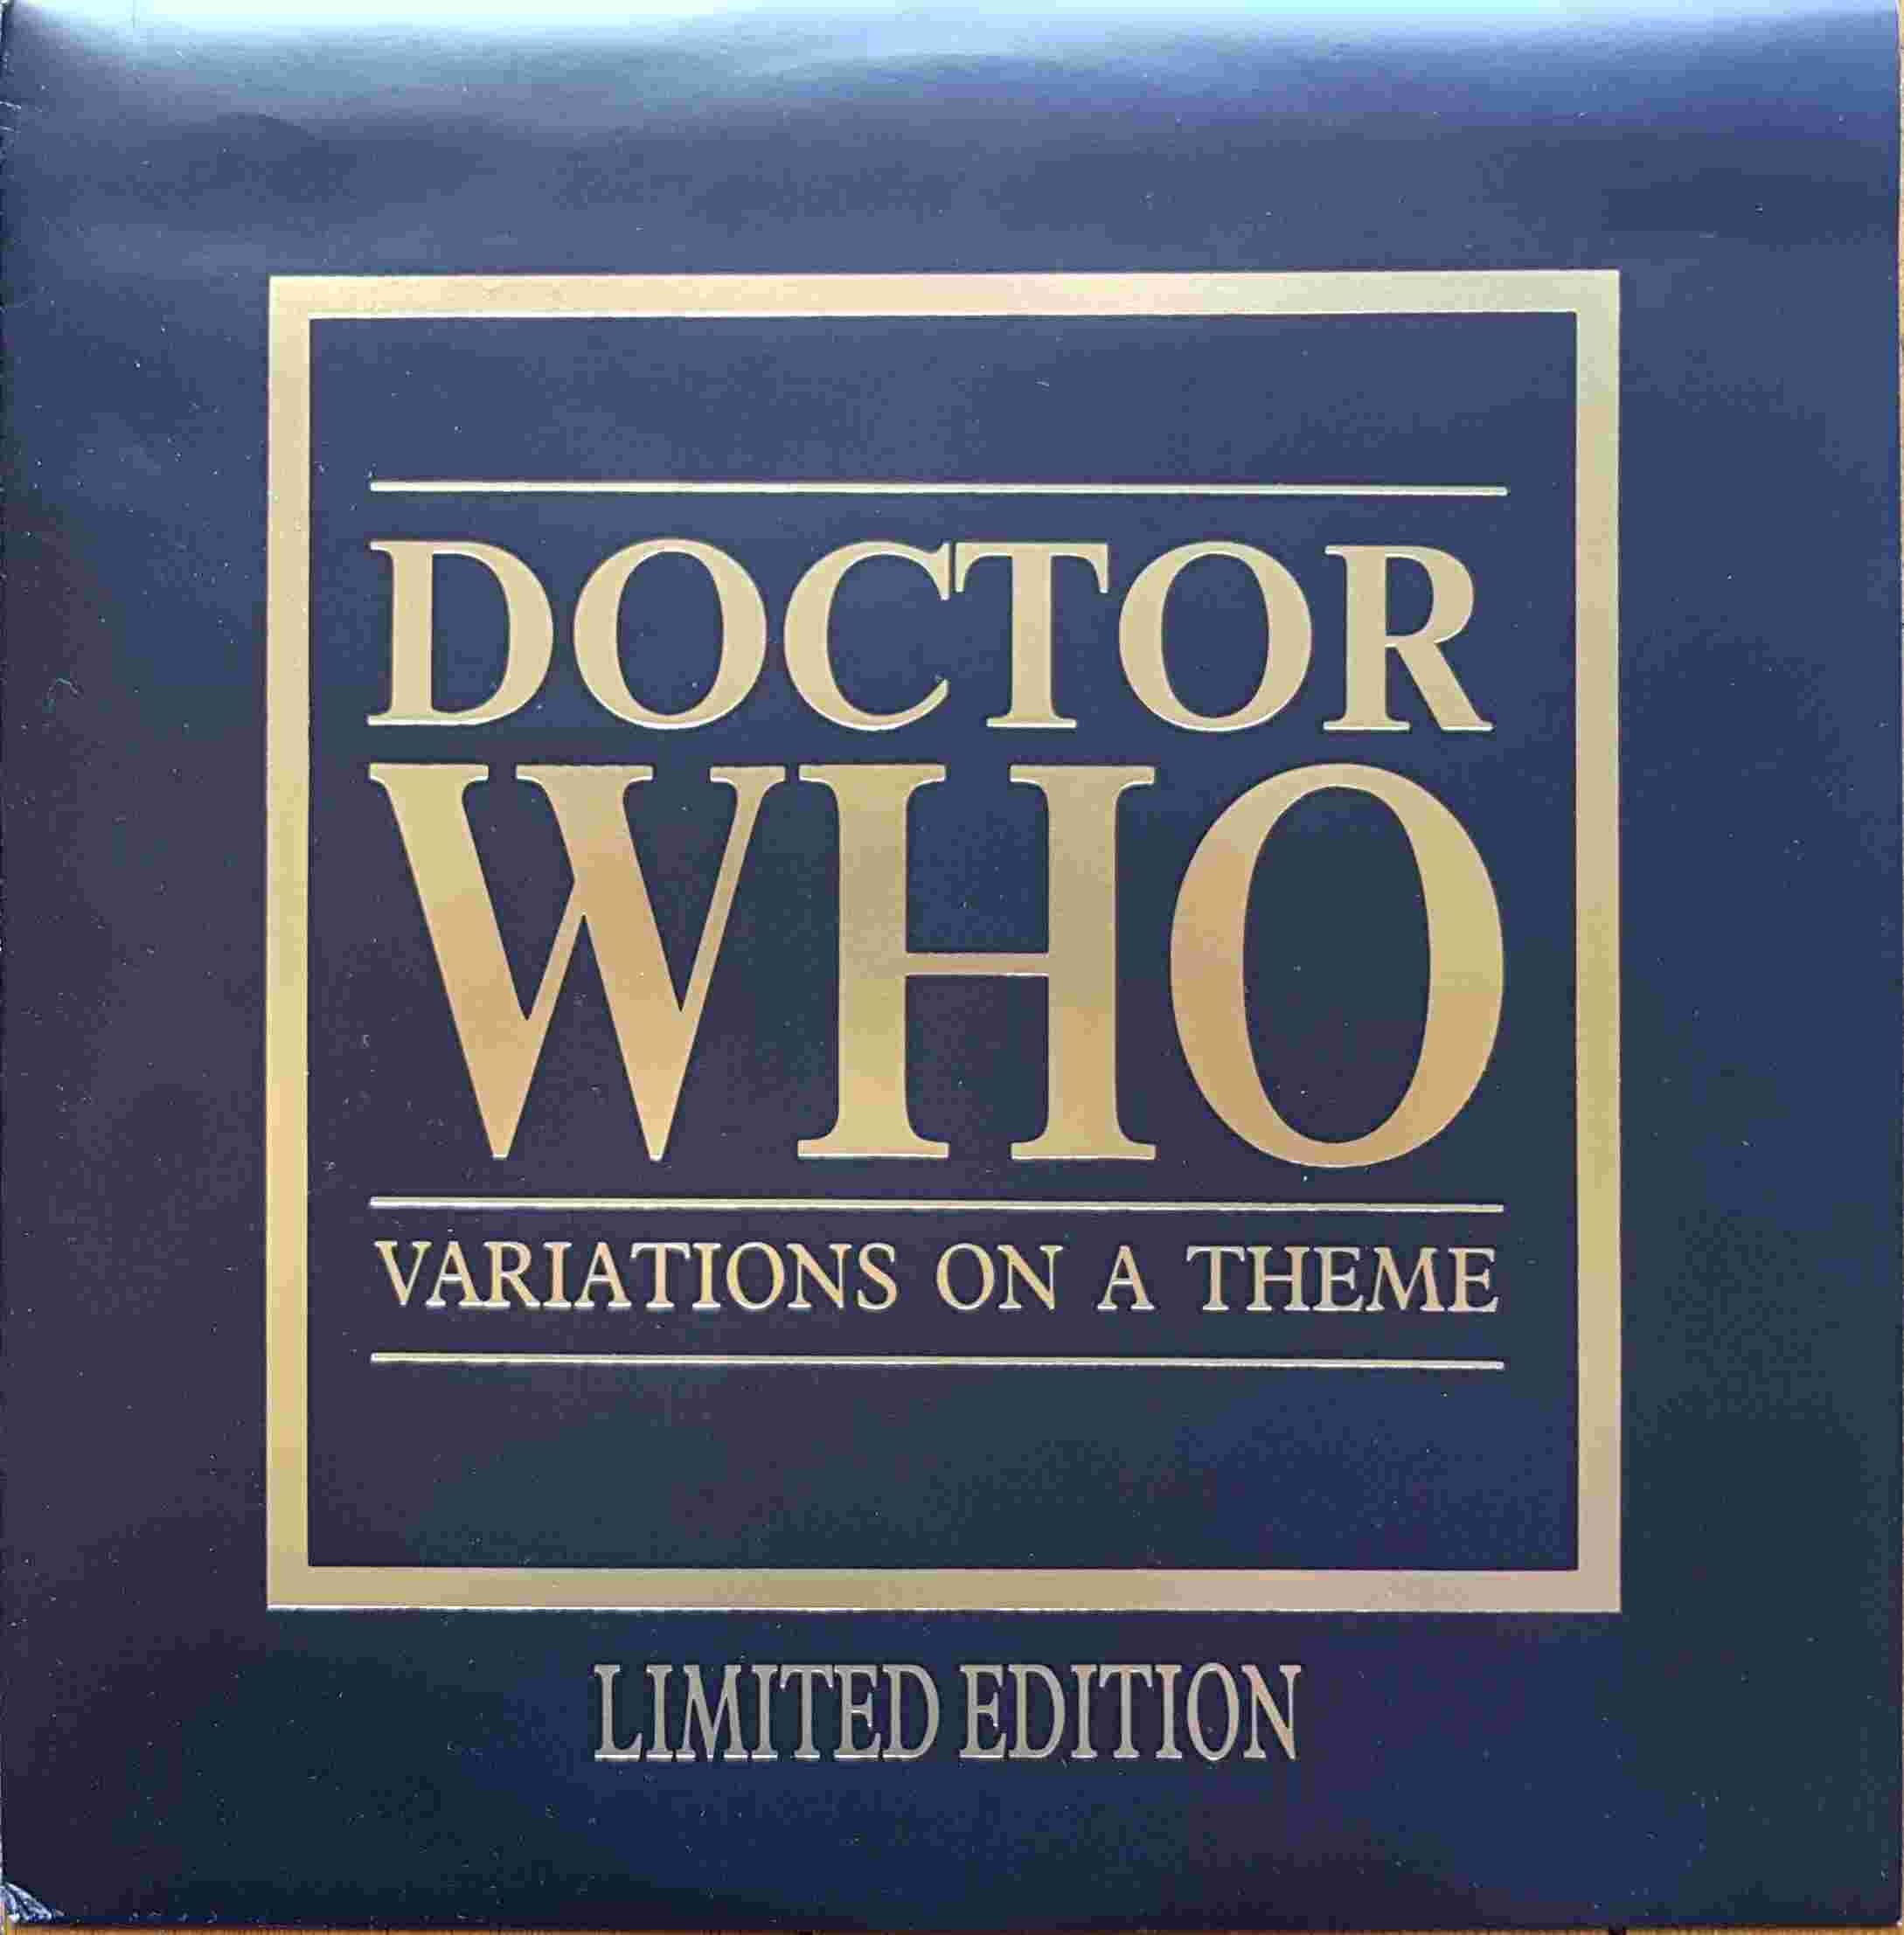 Picture of 12X MMI-4 Doctor Who - Variations on a theme by artist Ron Grainer from the BBC records and Tapes library